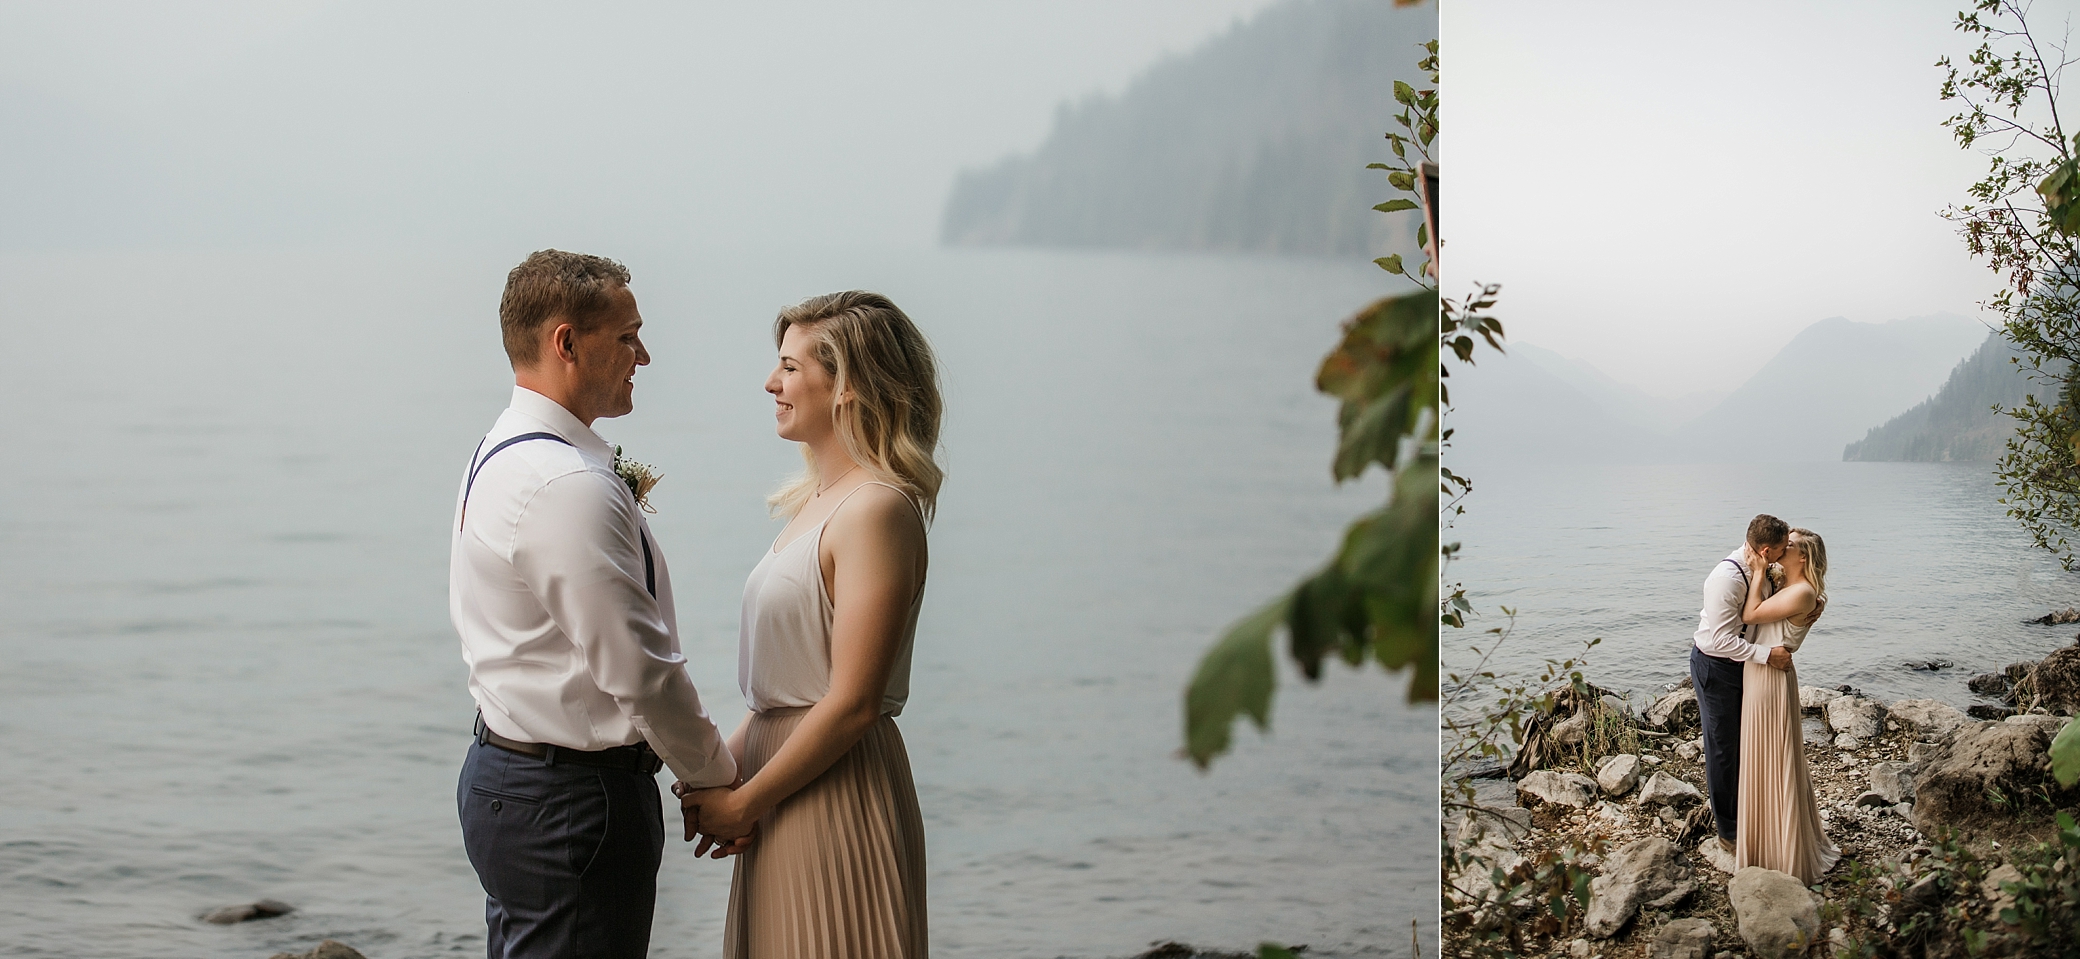 Intimate elopement ceremony on Lake Cushman. Photographed by PNW Elopement Photographer, Megan Montalvo Photography. 